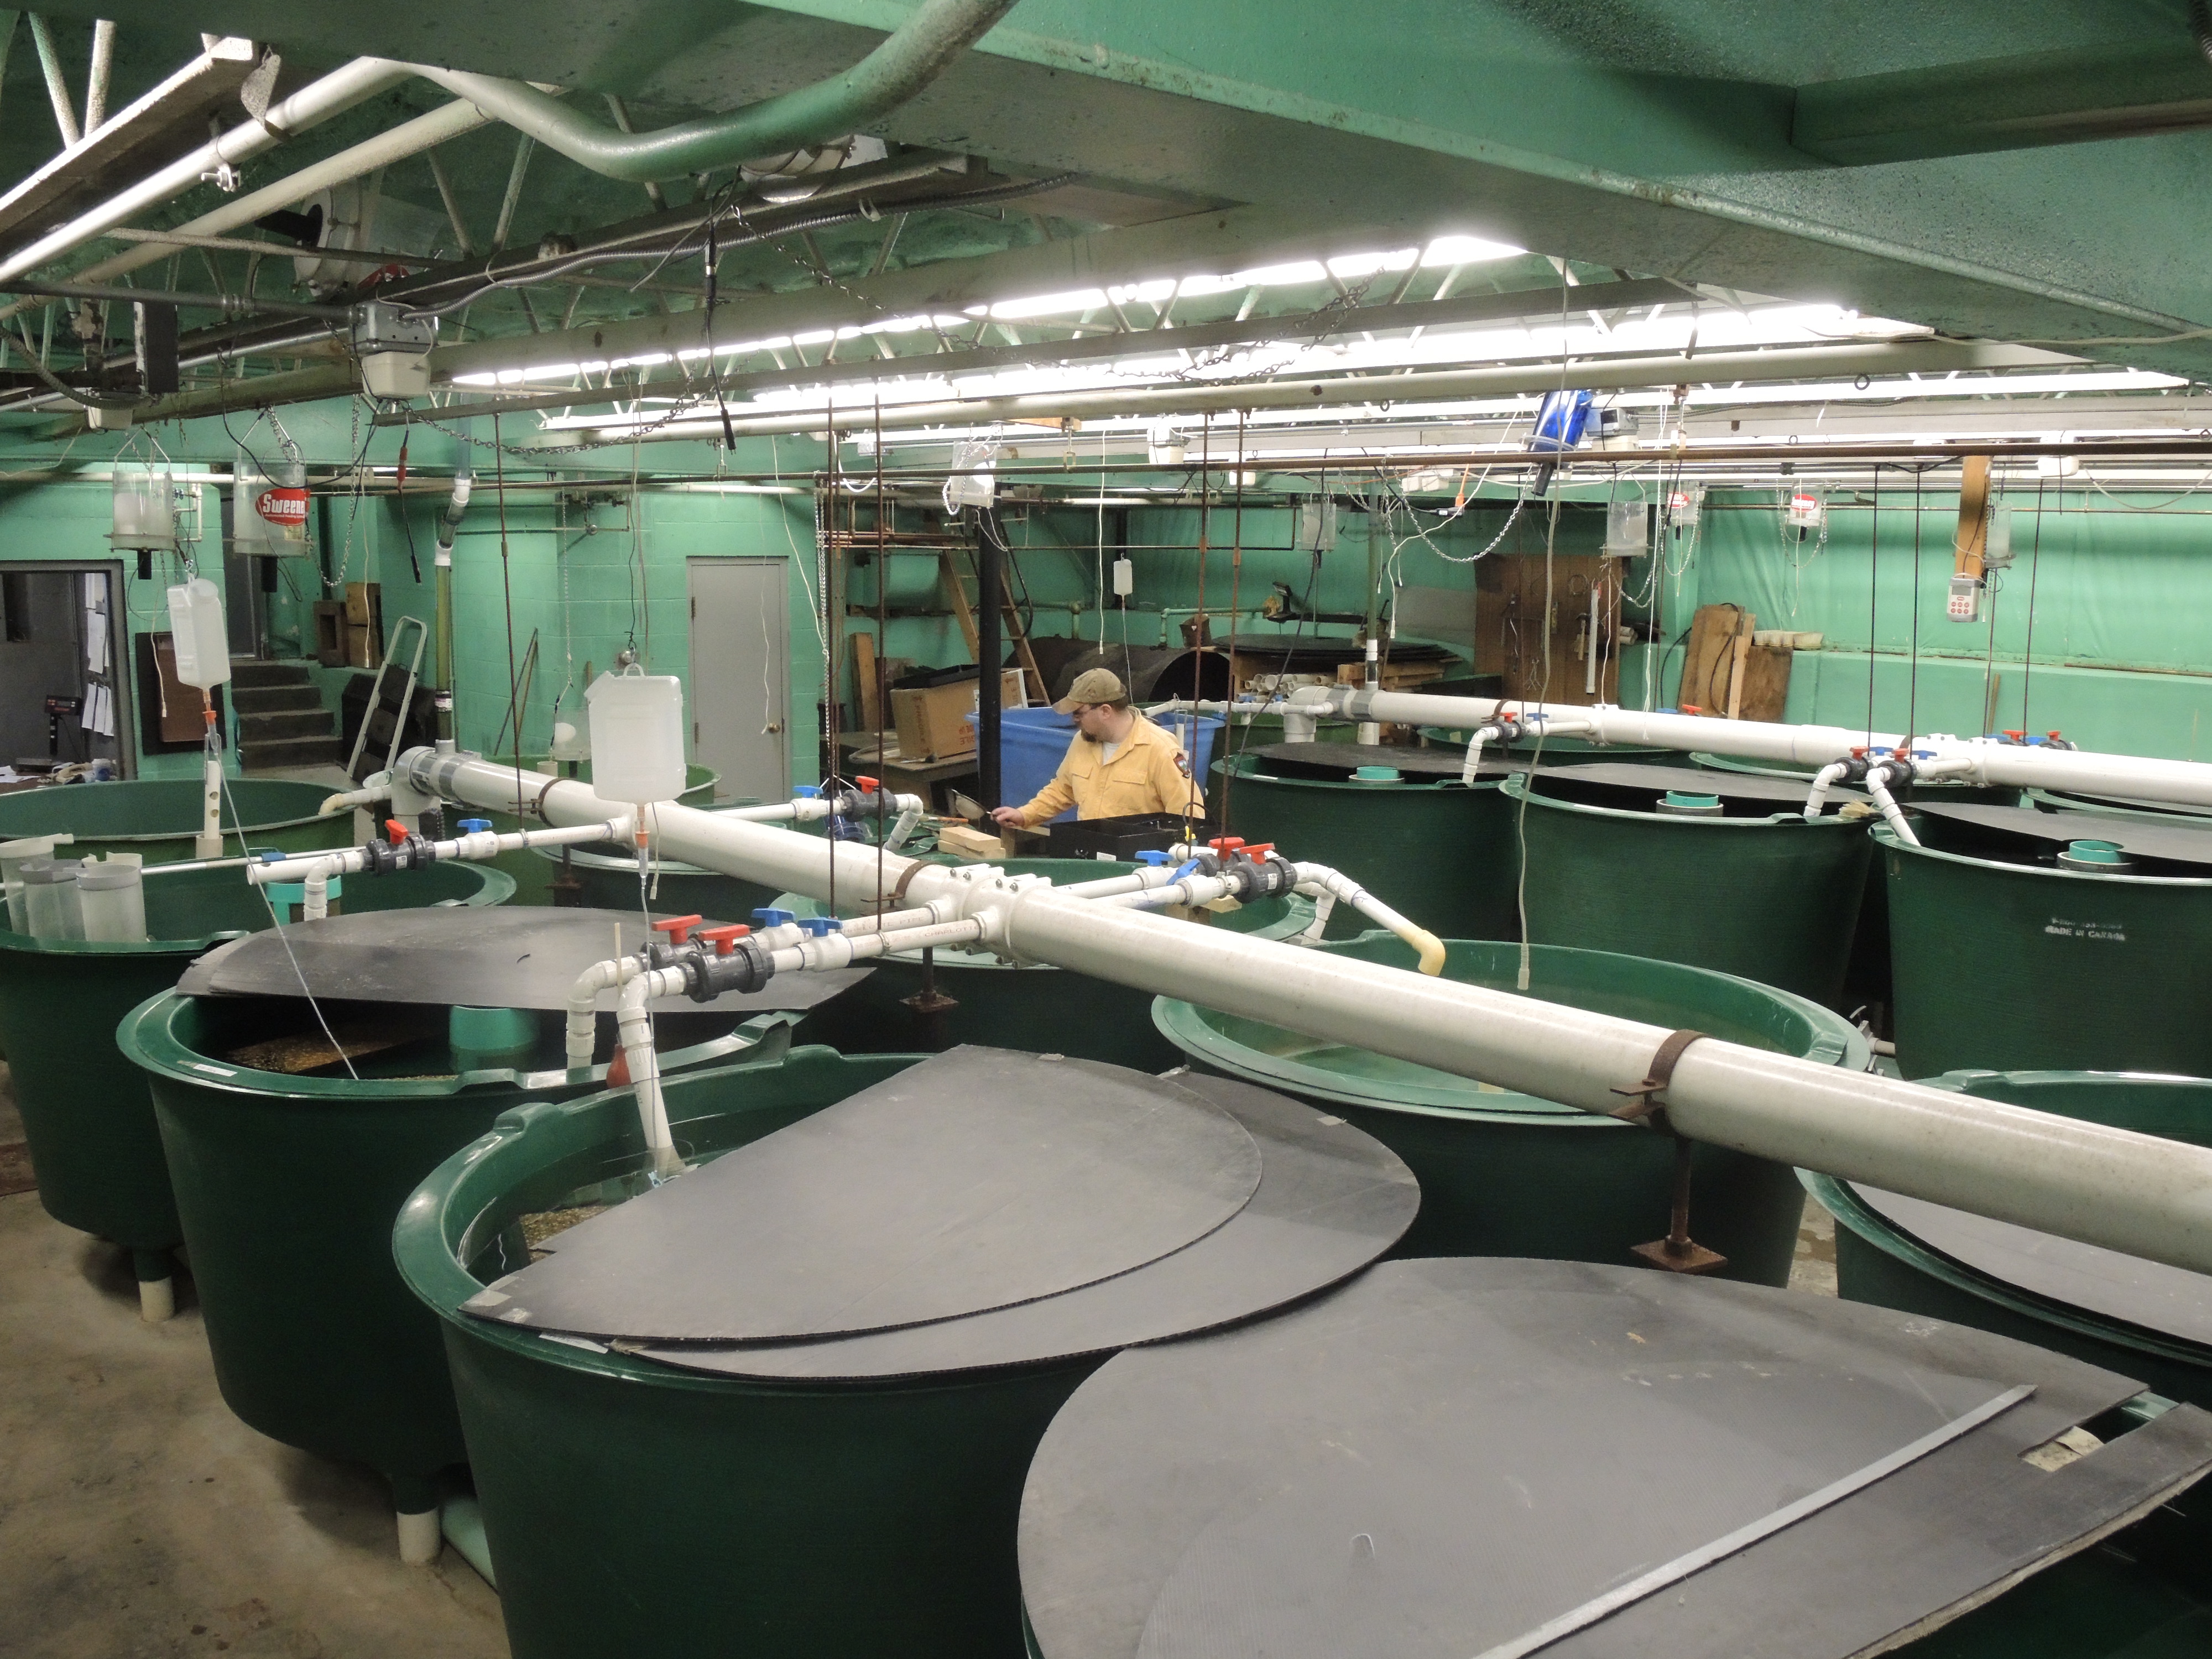 Once sorted, eggs will be placed in trays and set in these large green tanks where they will hatch.